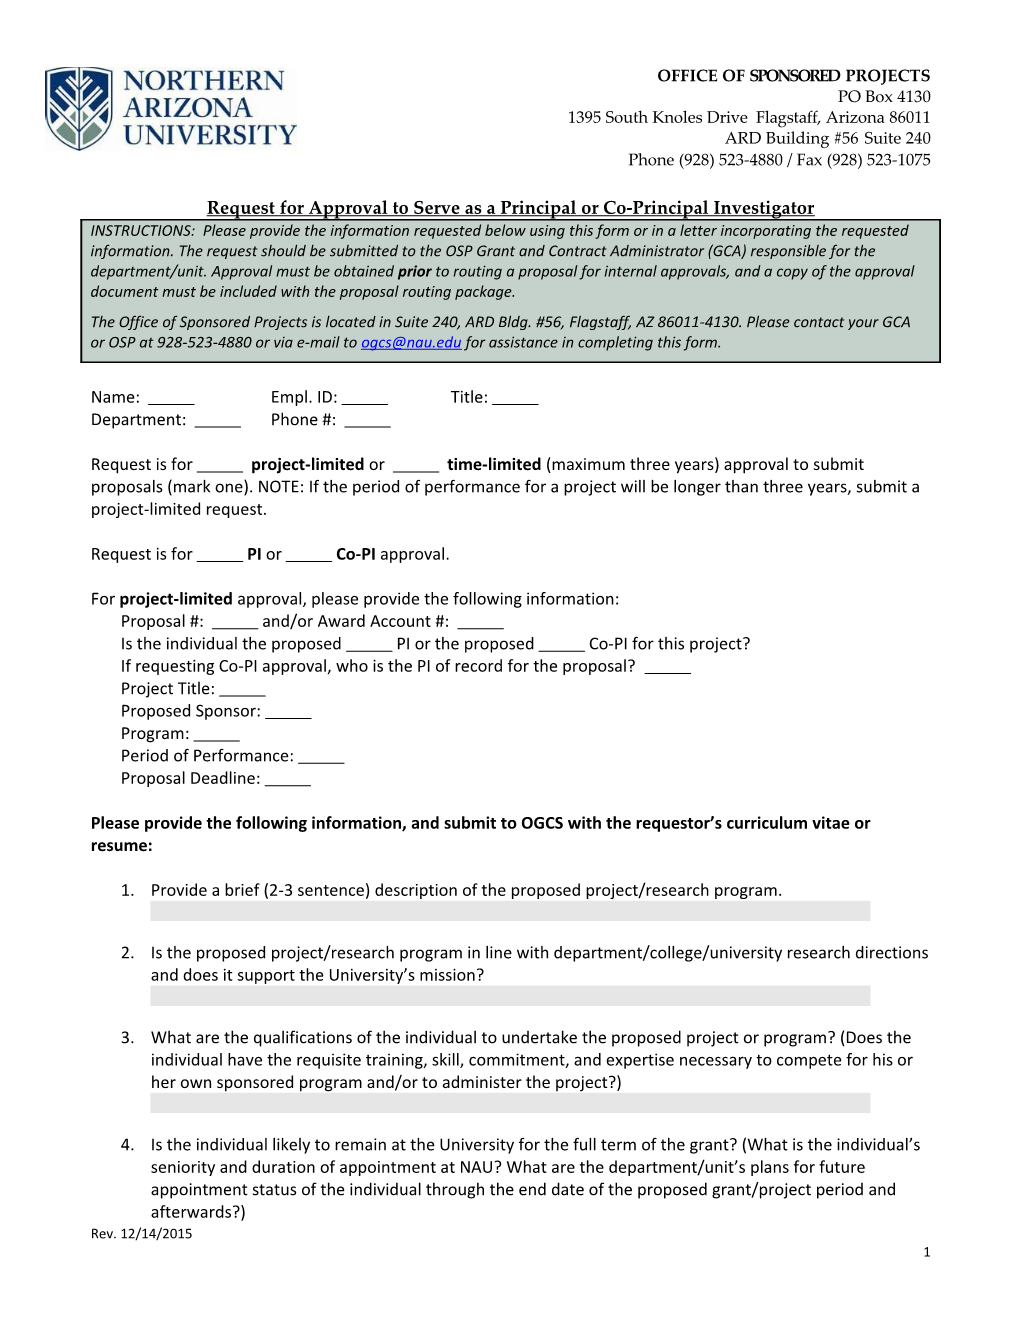 Request for Approval to Serve As a Principal Or Co-Principal Investigator